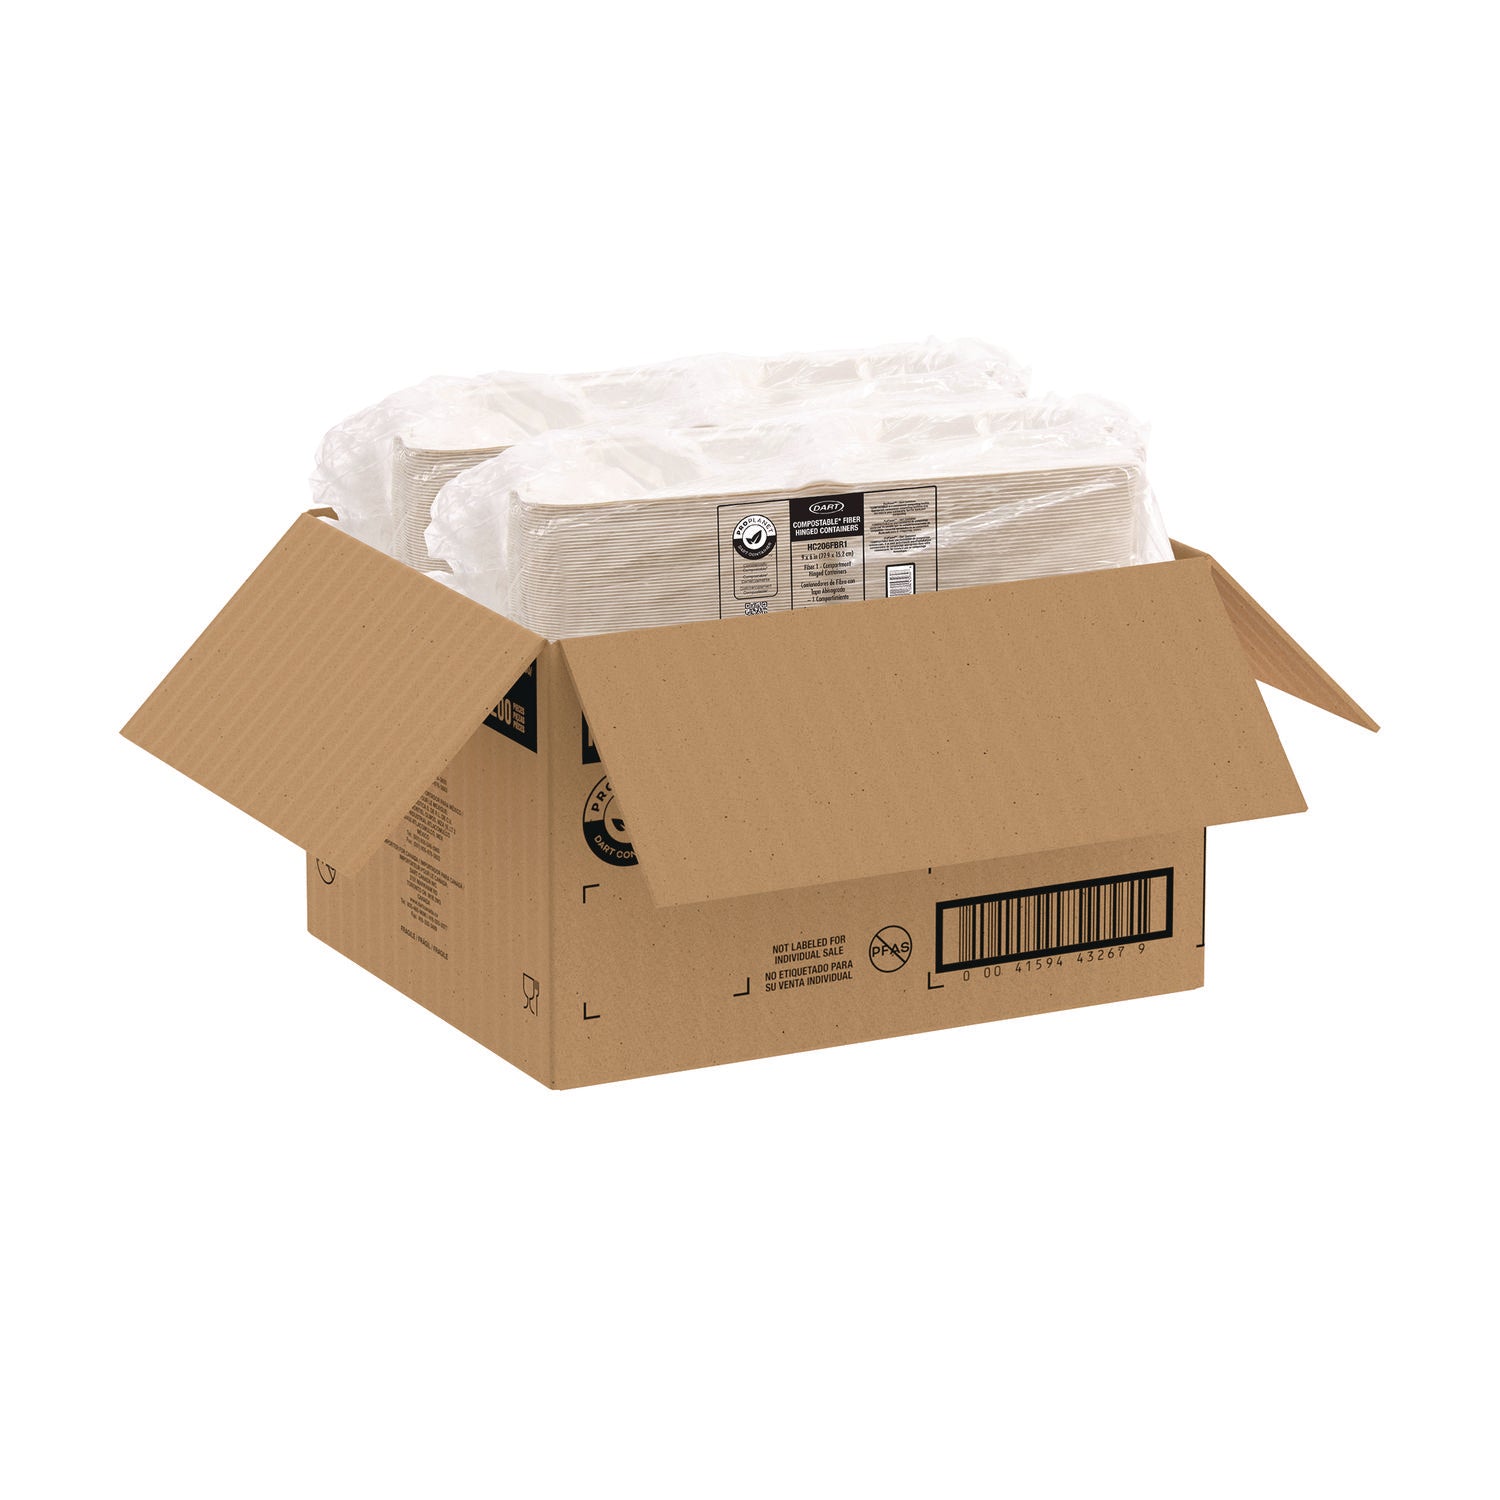 compostable-fiber-hinged-containers-proplanet-seal-634-x-906-x-197-ivory-molded-fiber-200-carton_dcchc206fbr1 - 4